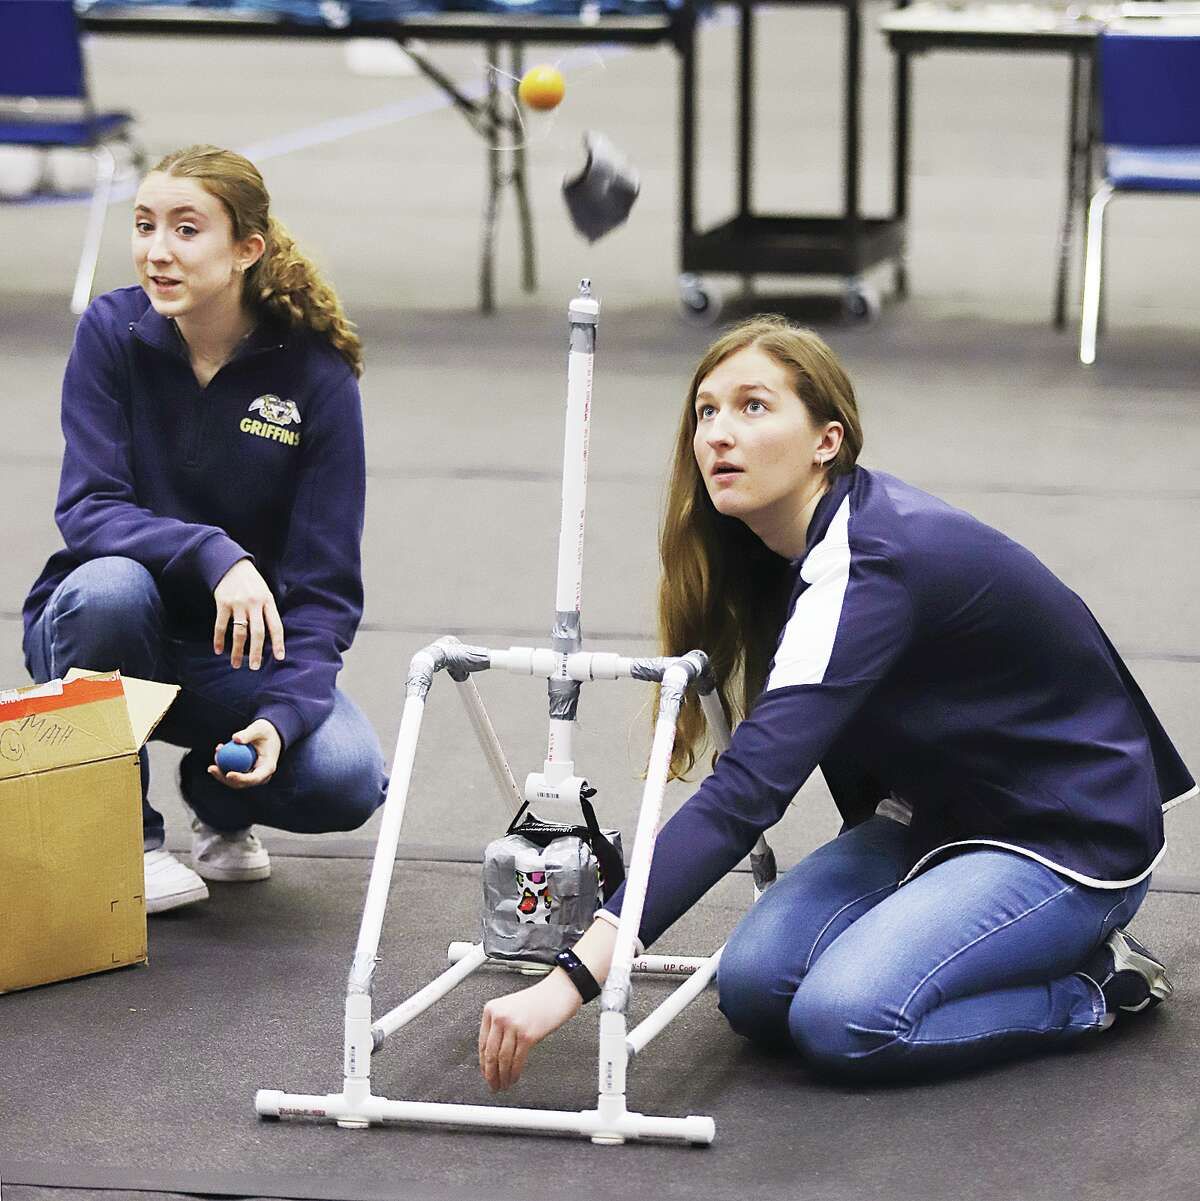 Father McGivney Catholic High School student Alyssa Tevhaar, right, fires off a practice launch Friday in the 16th Annual Trebuchet Competition held in the Riverbend Arena at Lewis and Clark Community College in Godfrey.